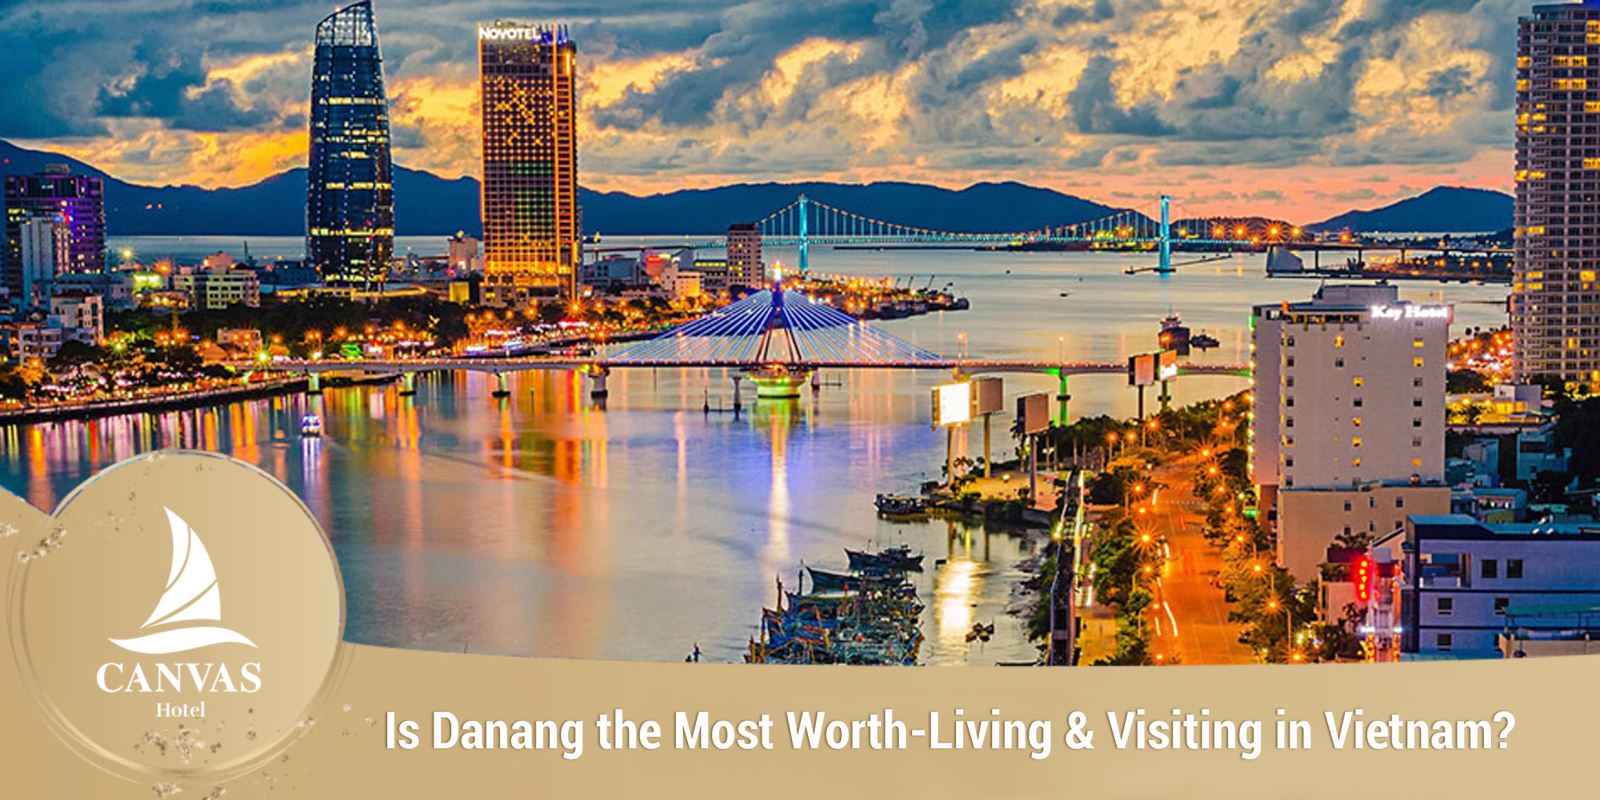 Is Danang the Most Worth-Living & Visiting in Vietnam?